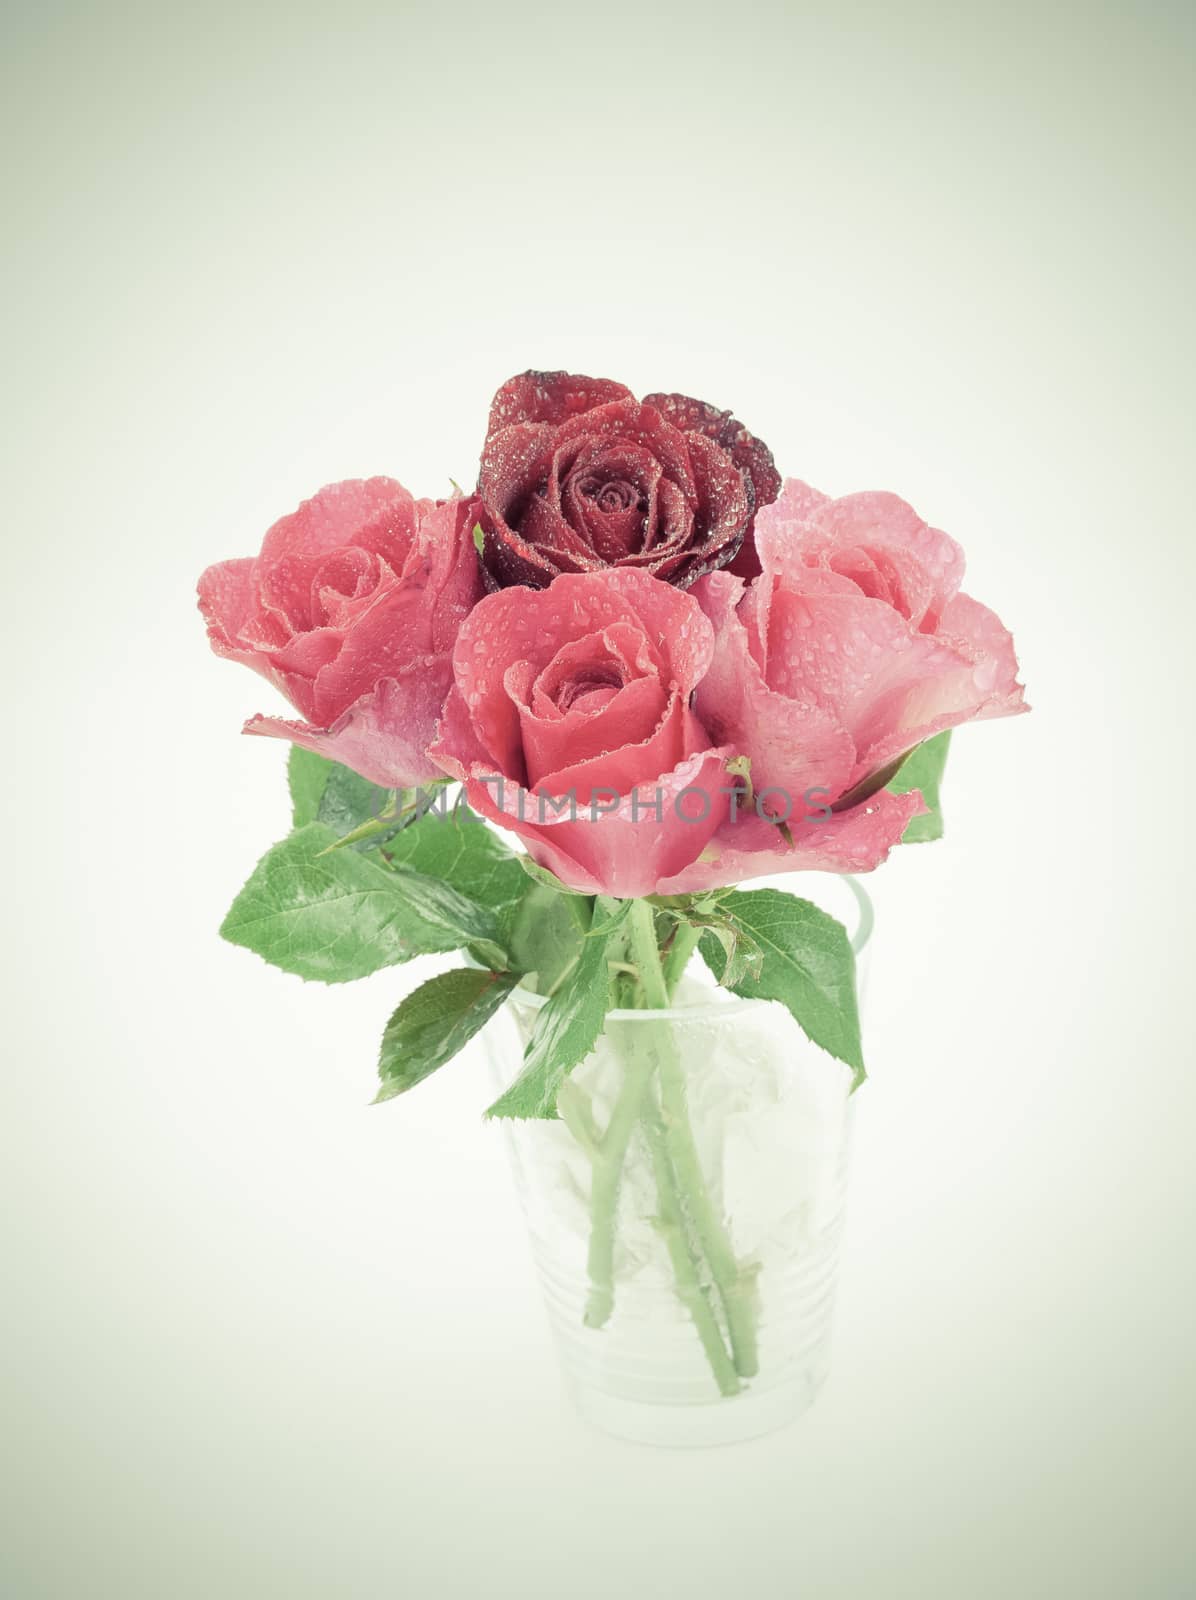 vintage effect style of Rose isolated over white